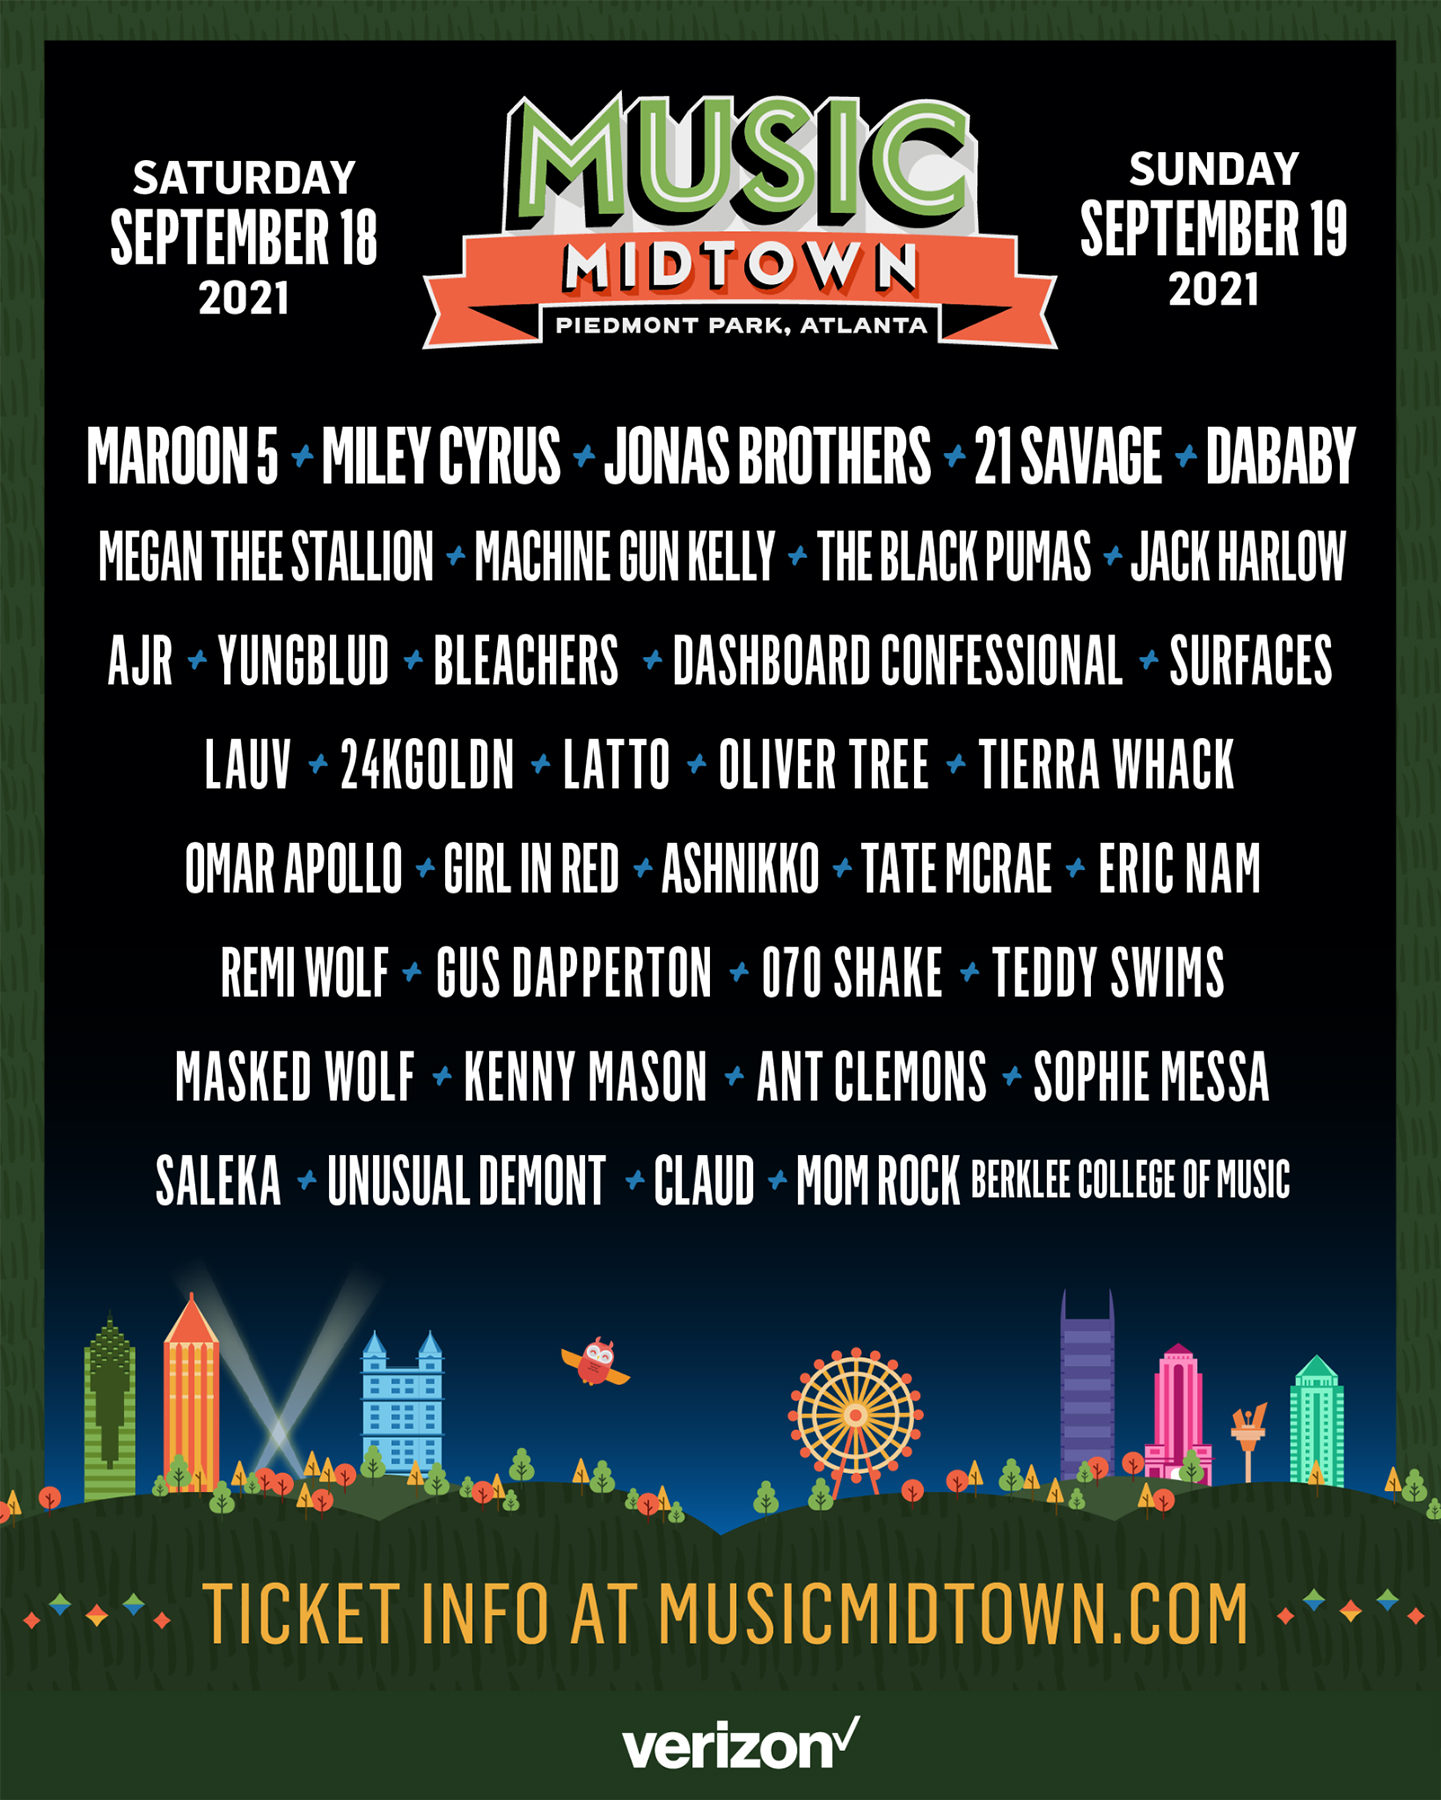 Music Midtown Announces Maroon 5, Miley Cyrus, Jonas Bros & More for